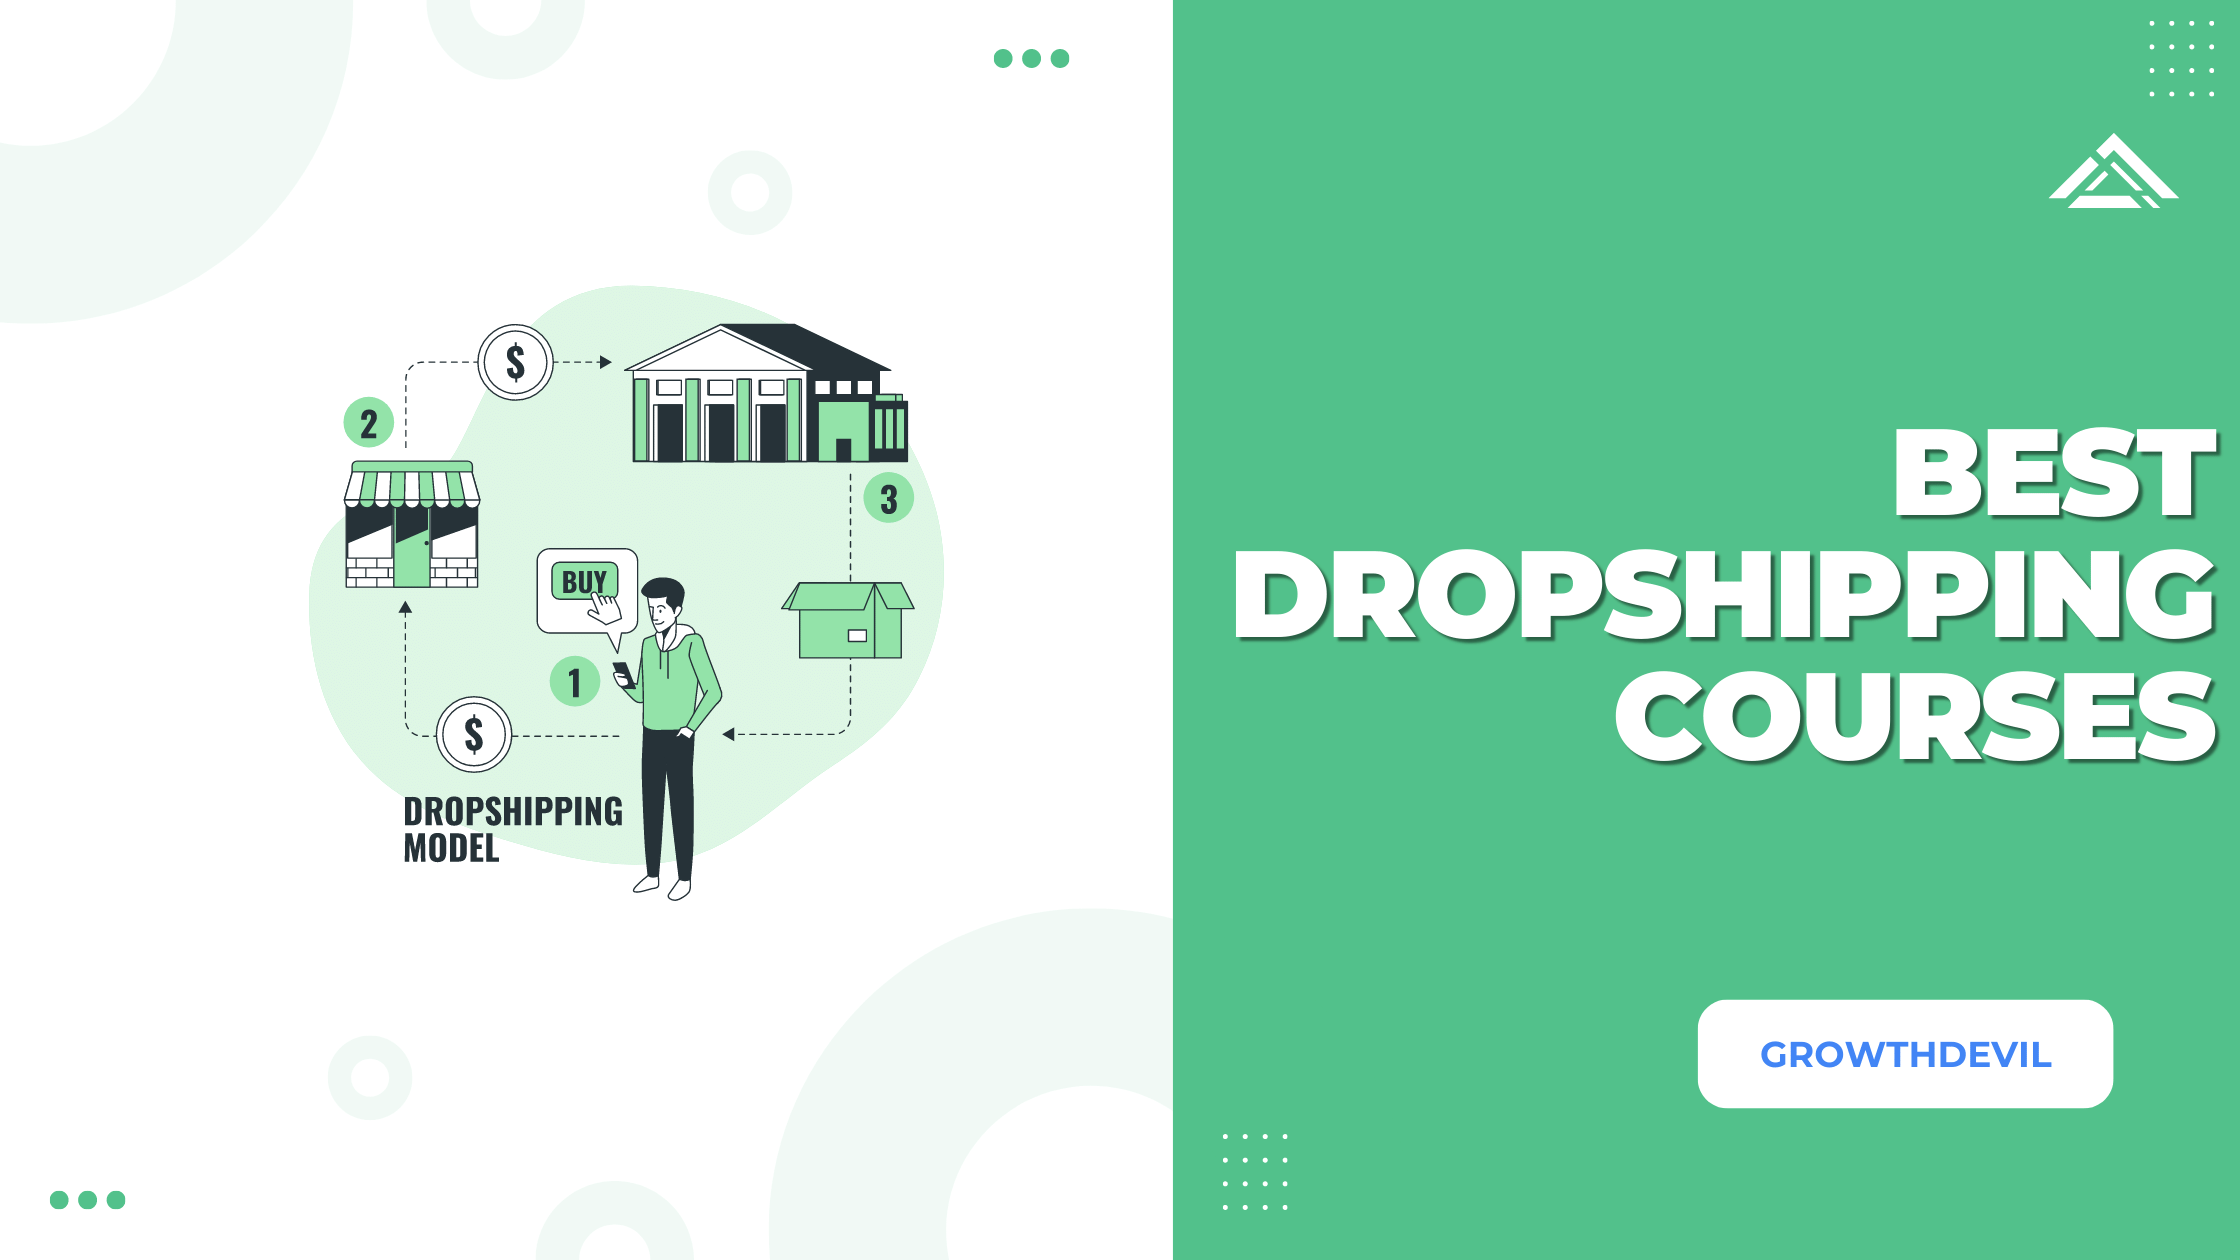 Best Dropshipping Courses - GrowthDevil